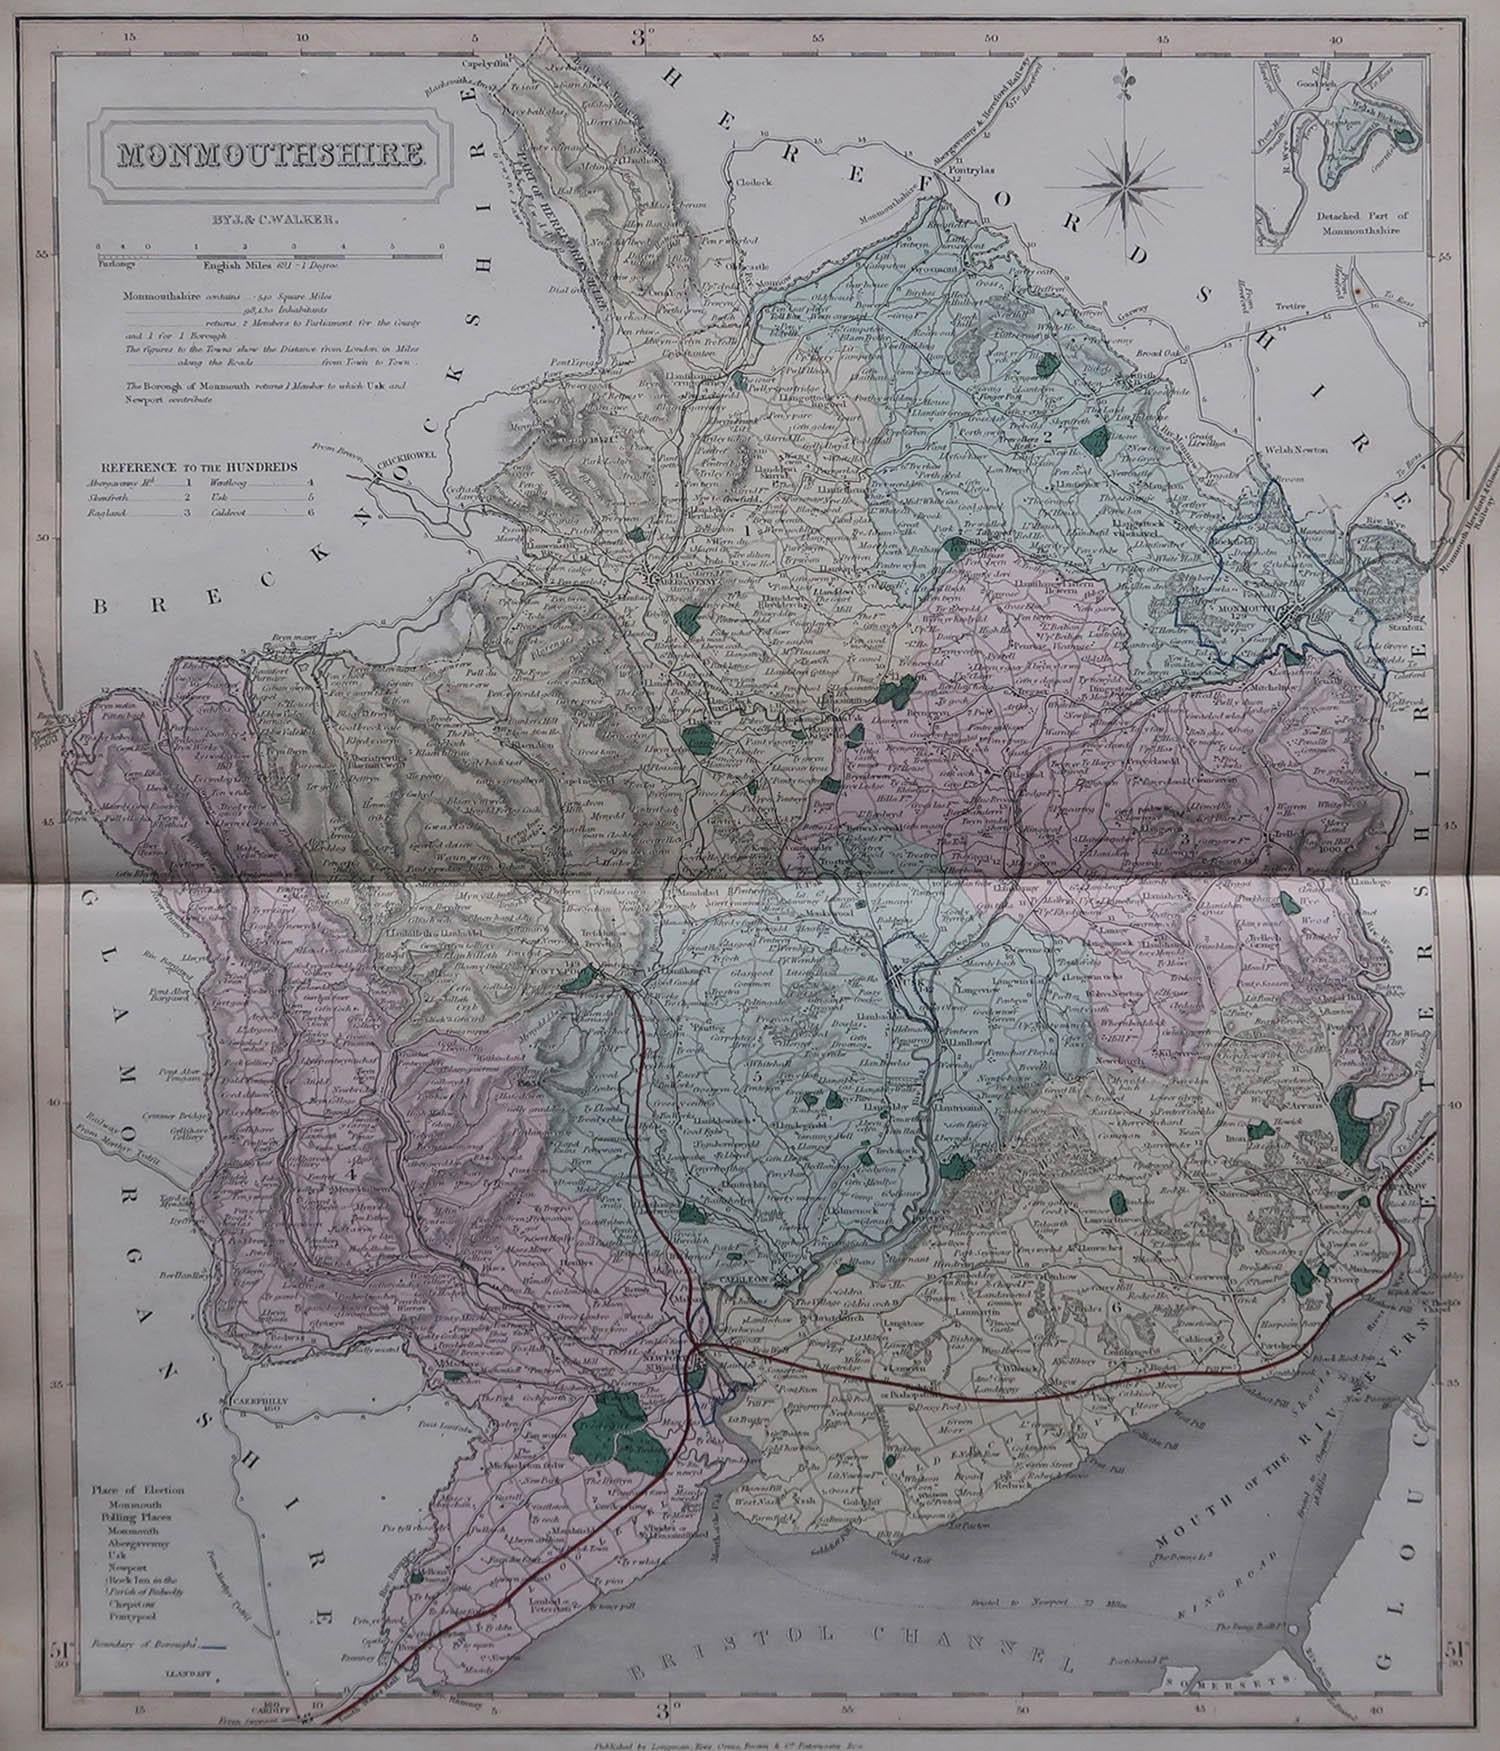 Great map of Monmouthshire

Original colour

By J & C Walker

Published by Longman, Rees, Orme, Brown & Co. 1851

Unframed.




